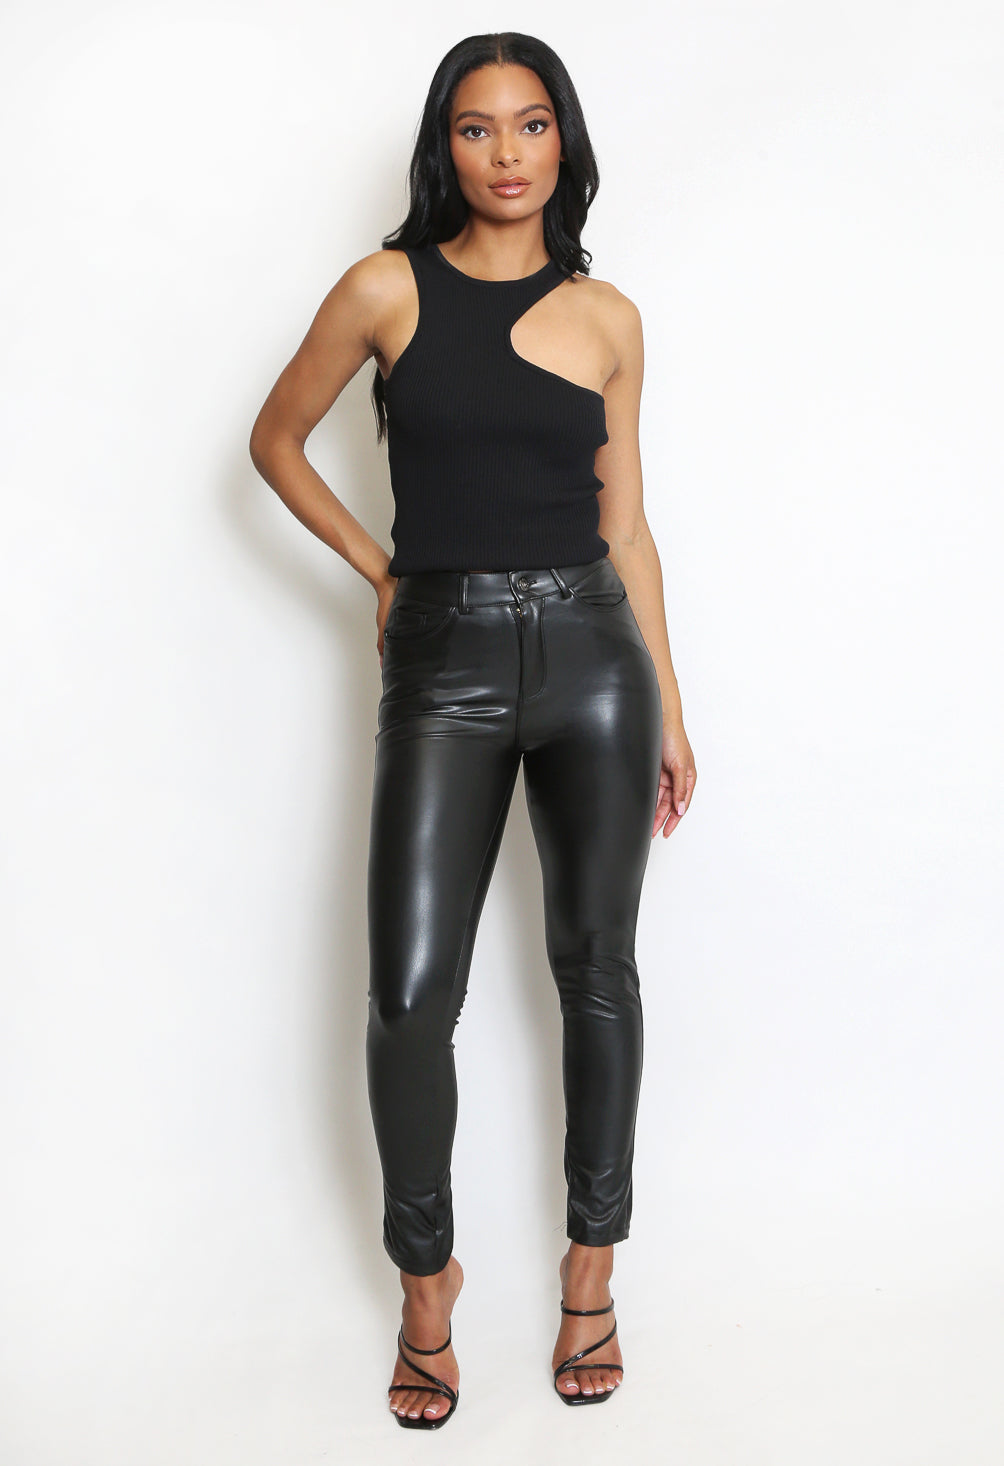 Stone Faux Leather High Waist Skinny Trousers